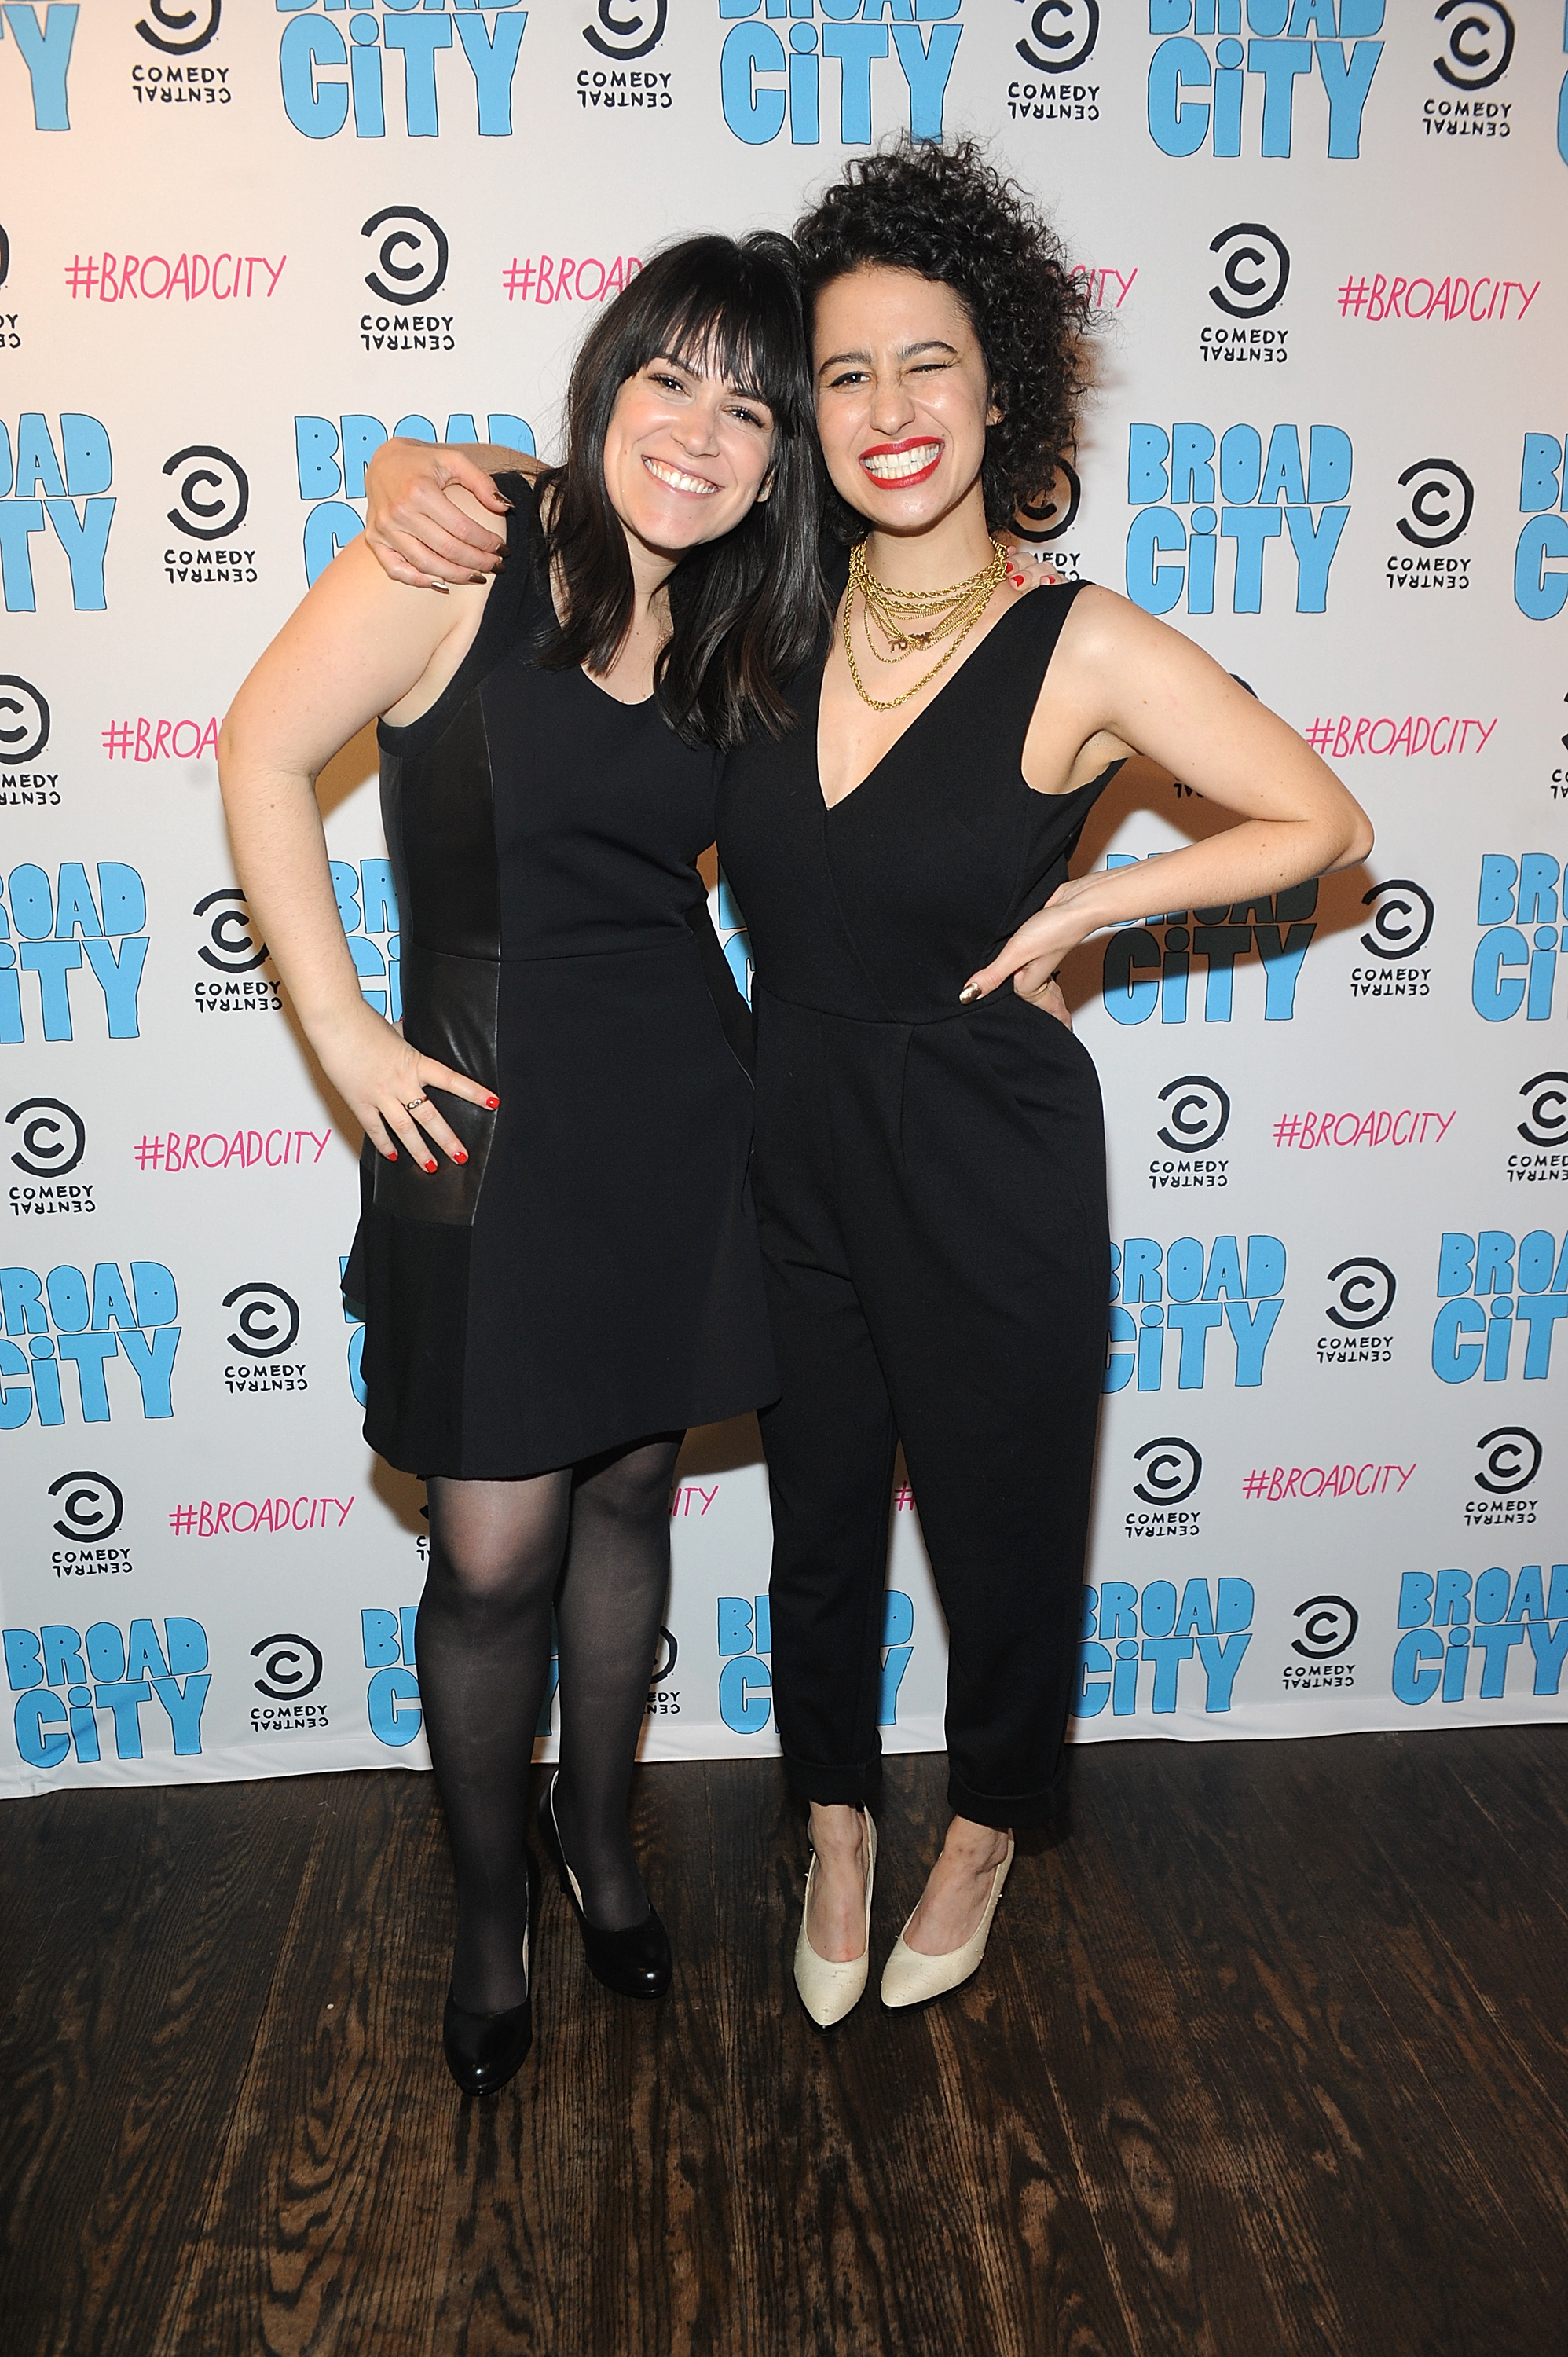 Comedy Central's "Broad City" Screening & Premiere Party